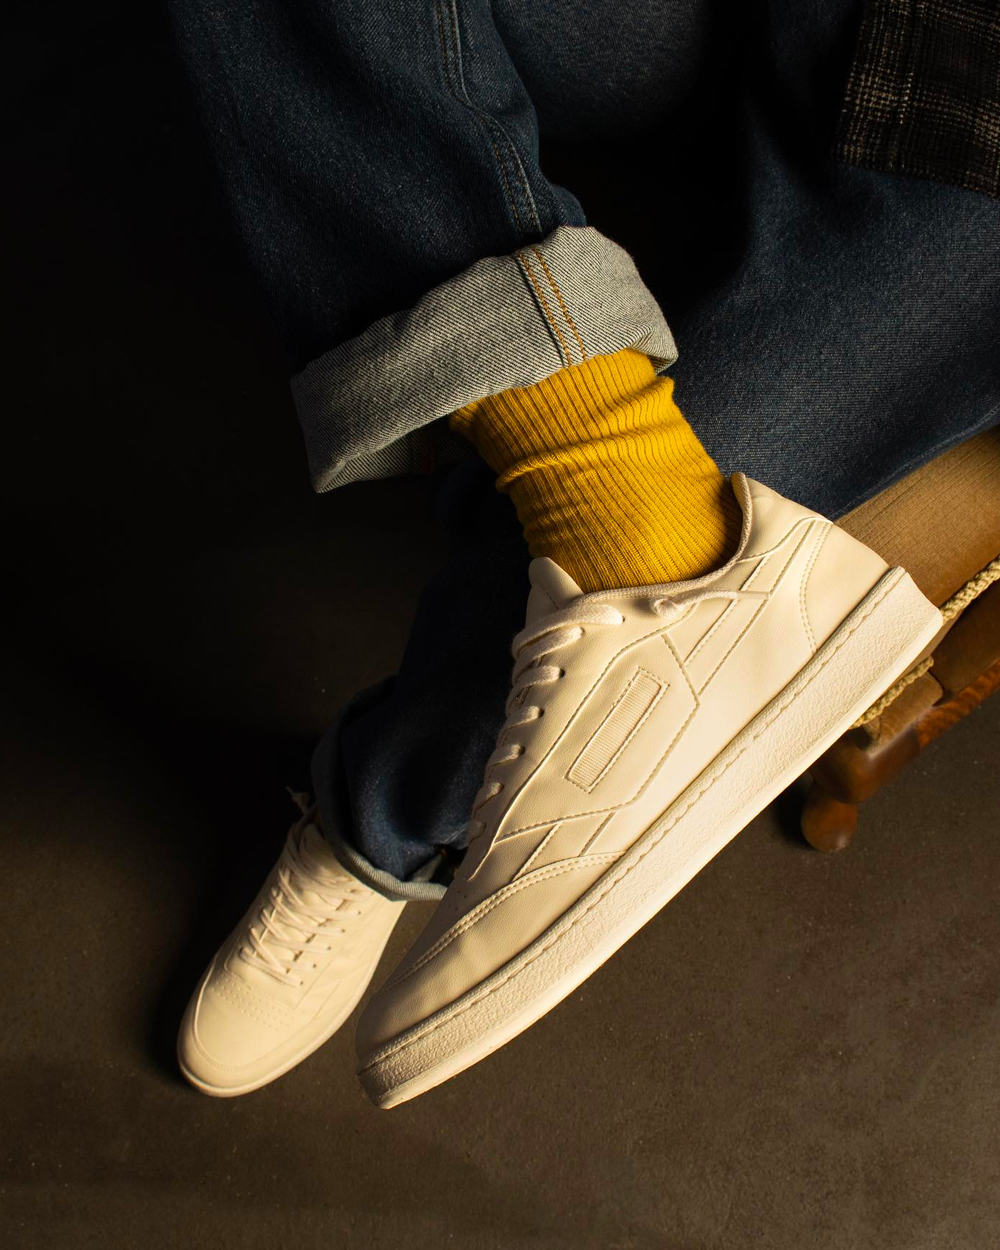 White Oliver Cabell sneakers worn on feet with turned up denim jeans and yellow socks